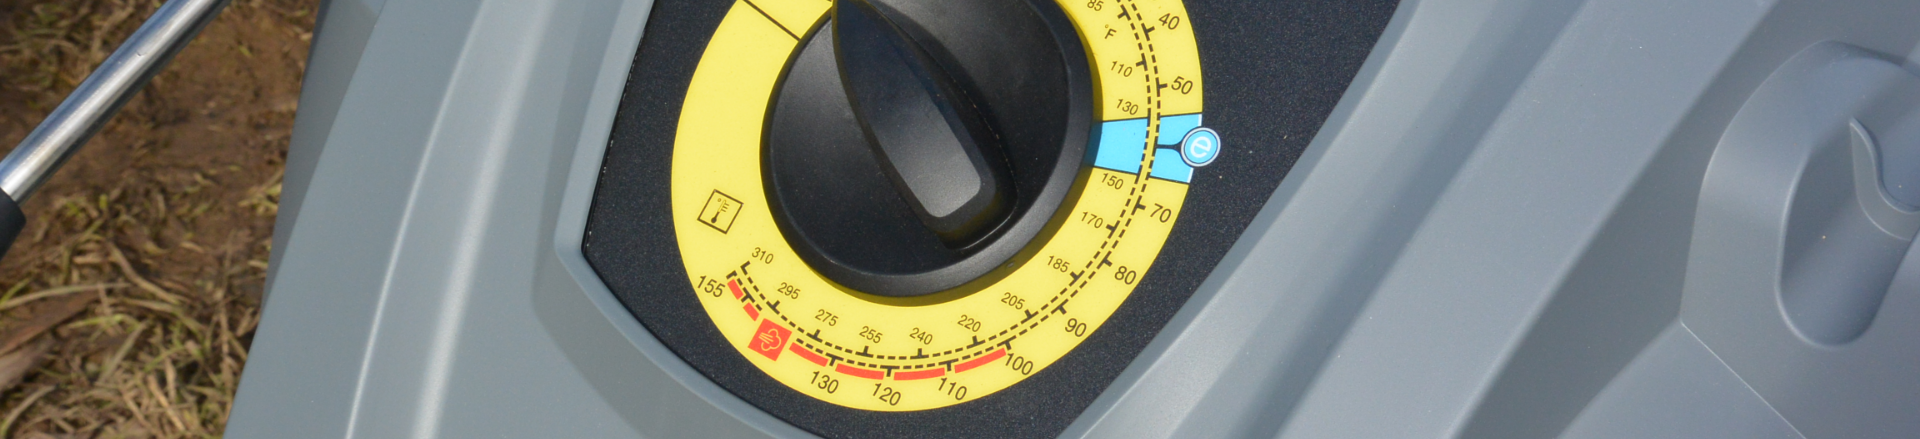 A close up of a gauge on a customized motorcycle.